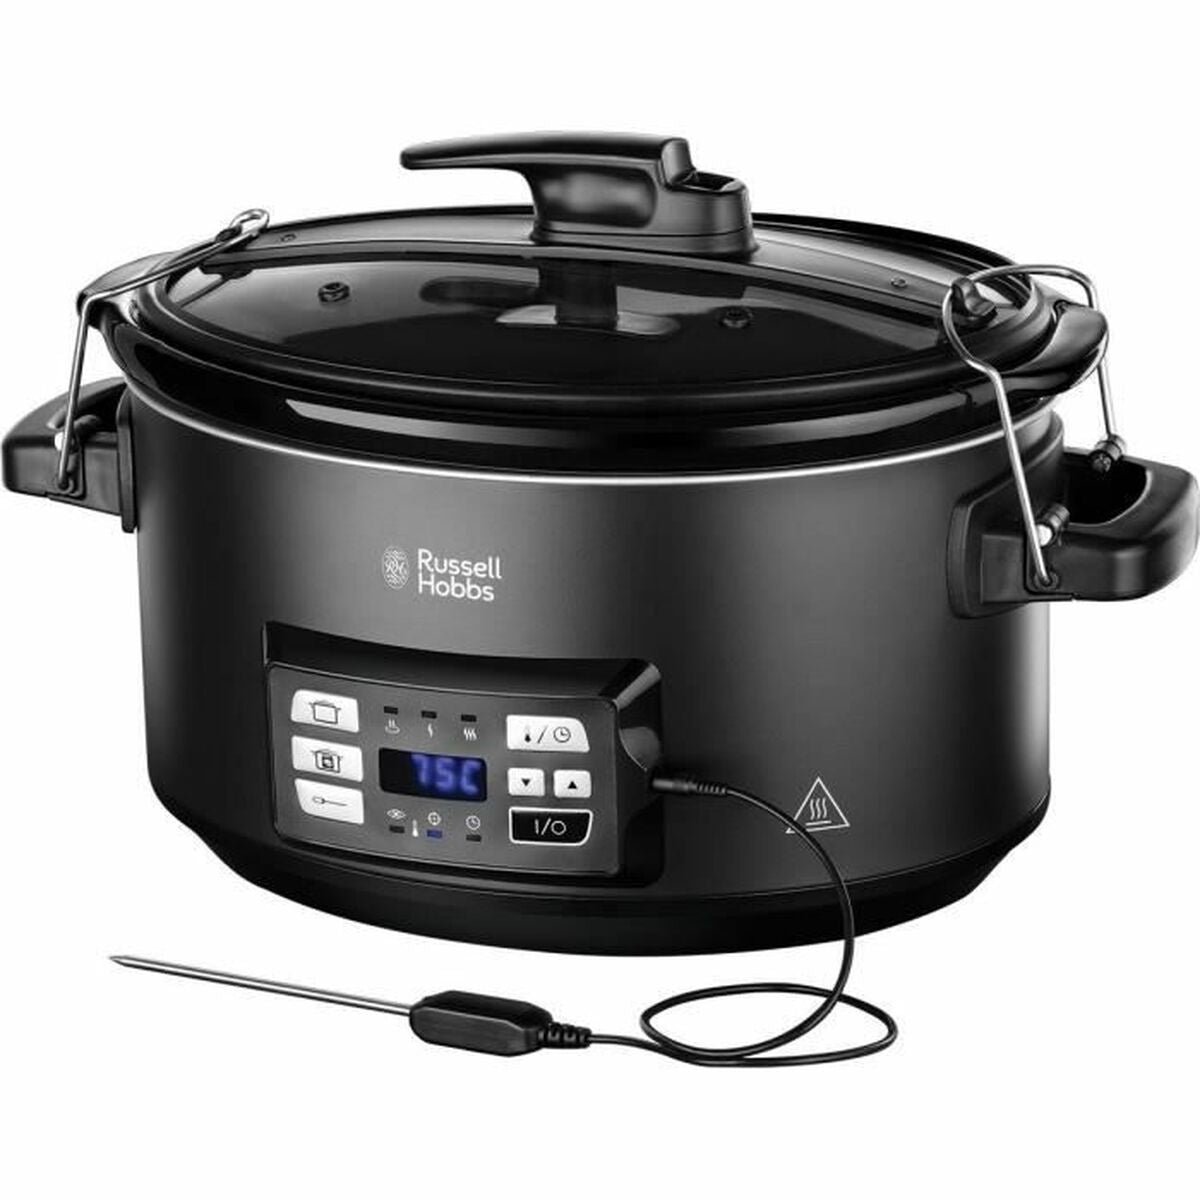 Slowcooker Russell Hobbs 25630-56 220 V 6,5 L 350 W 3 in 1